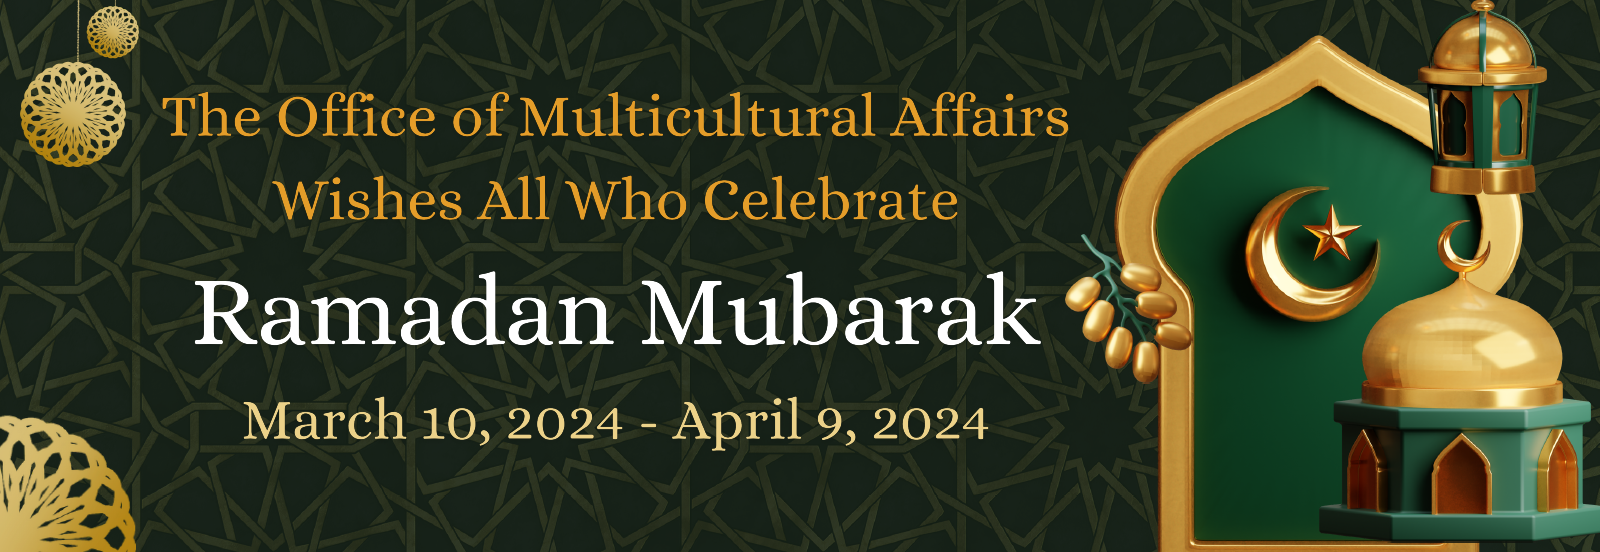 Office of Multicultural Affairs